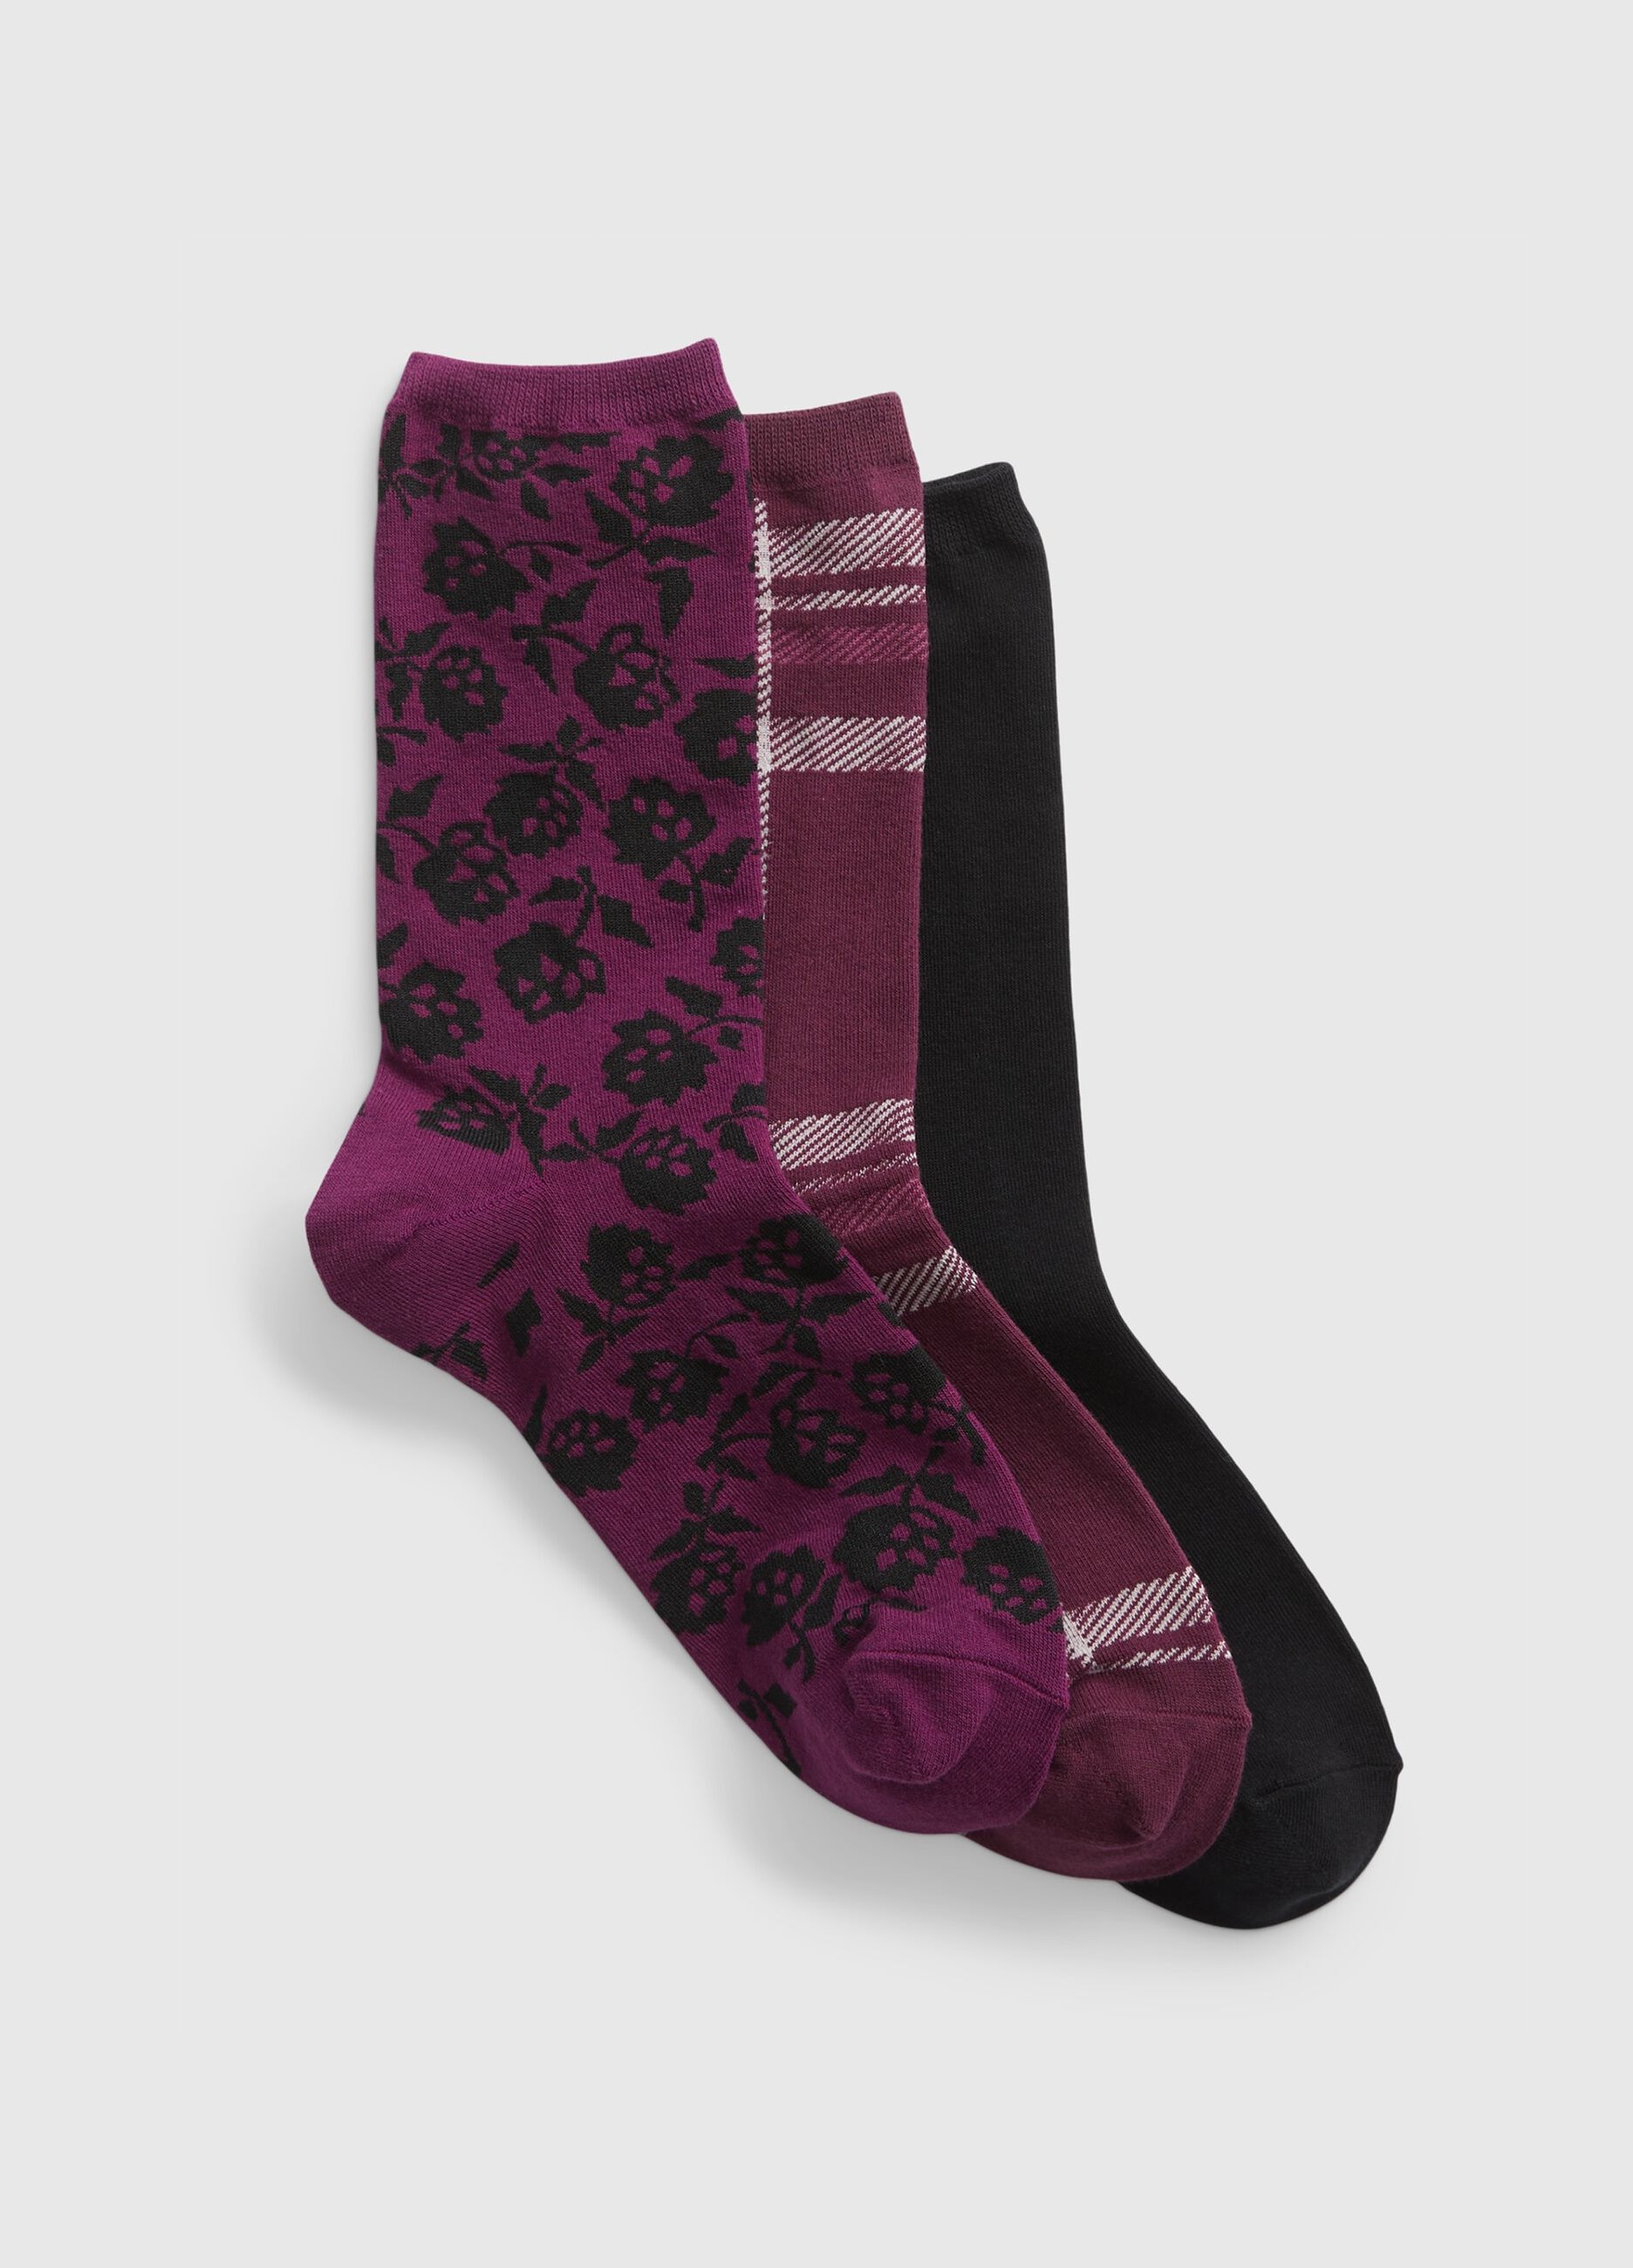 Three-pair pack socks with floral pattern